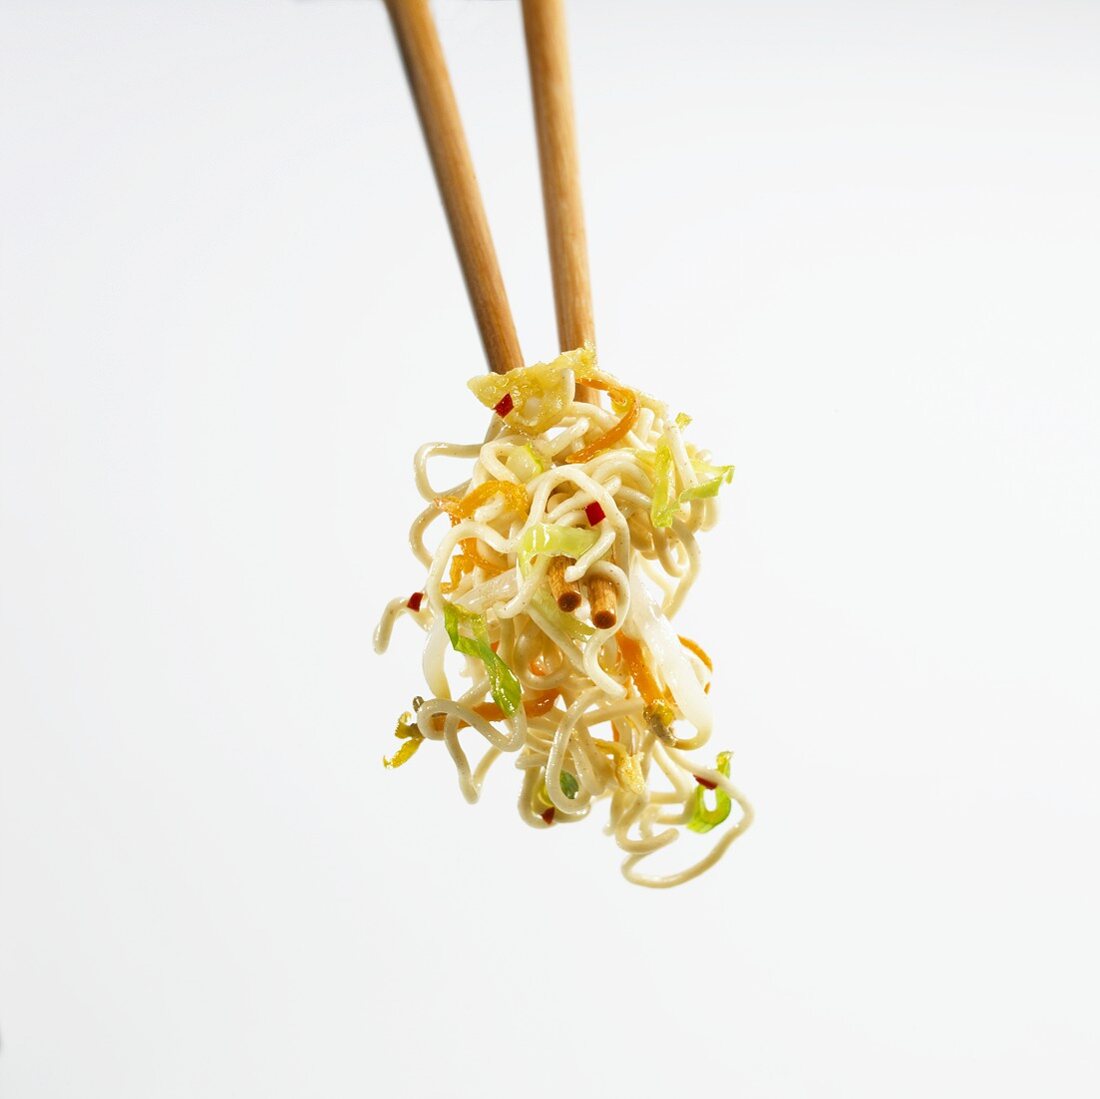 Stir-fried noodles and sprouts